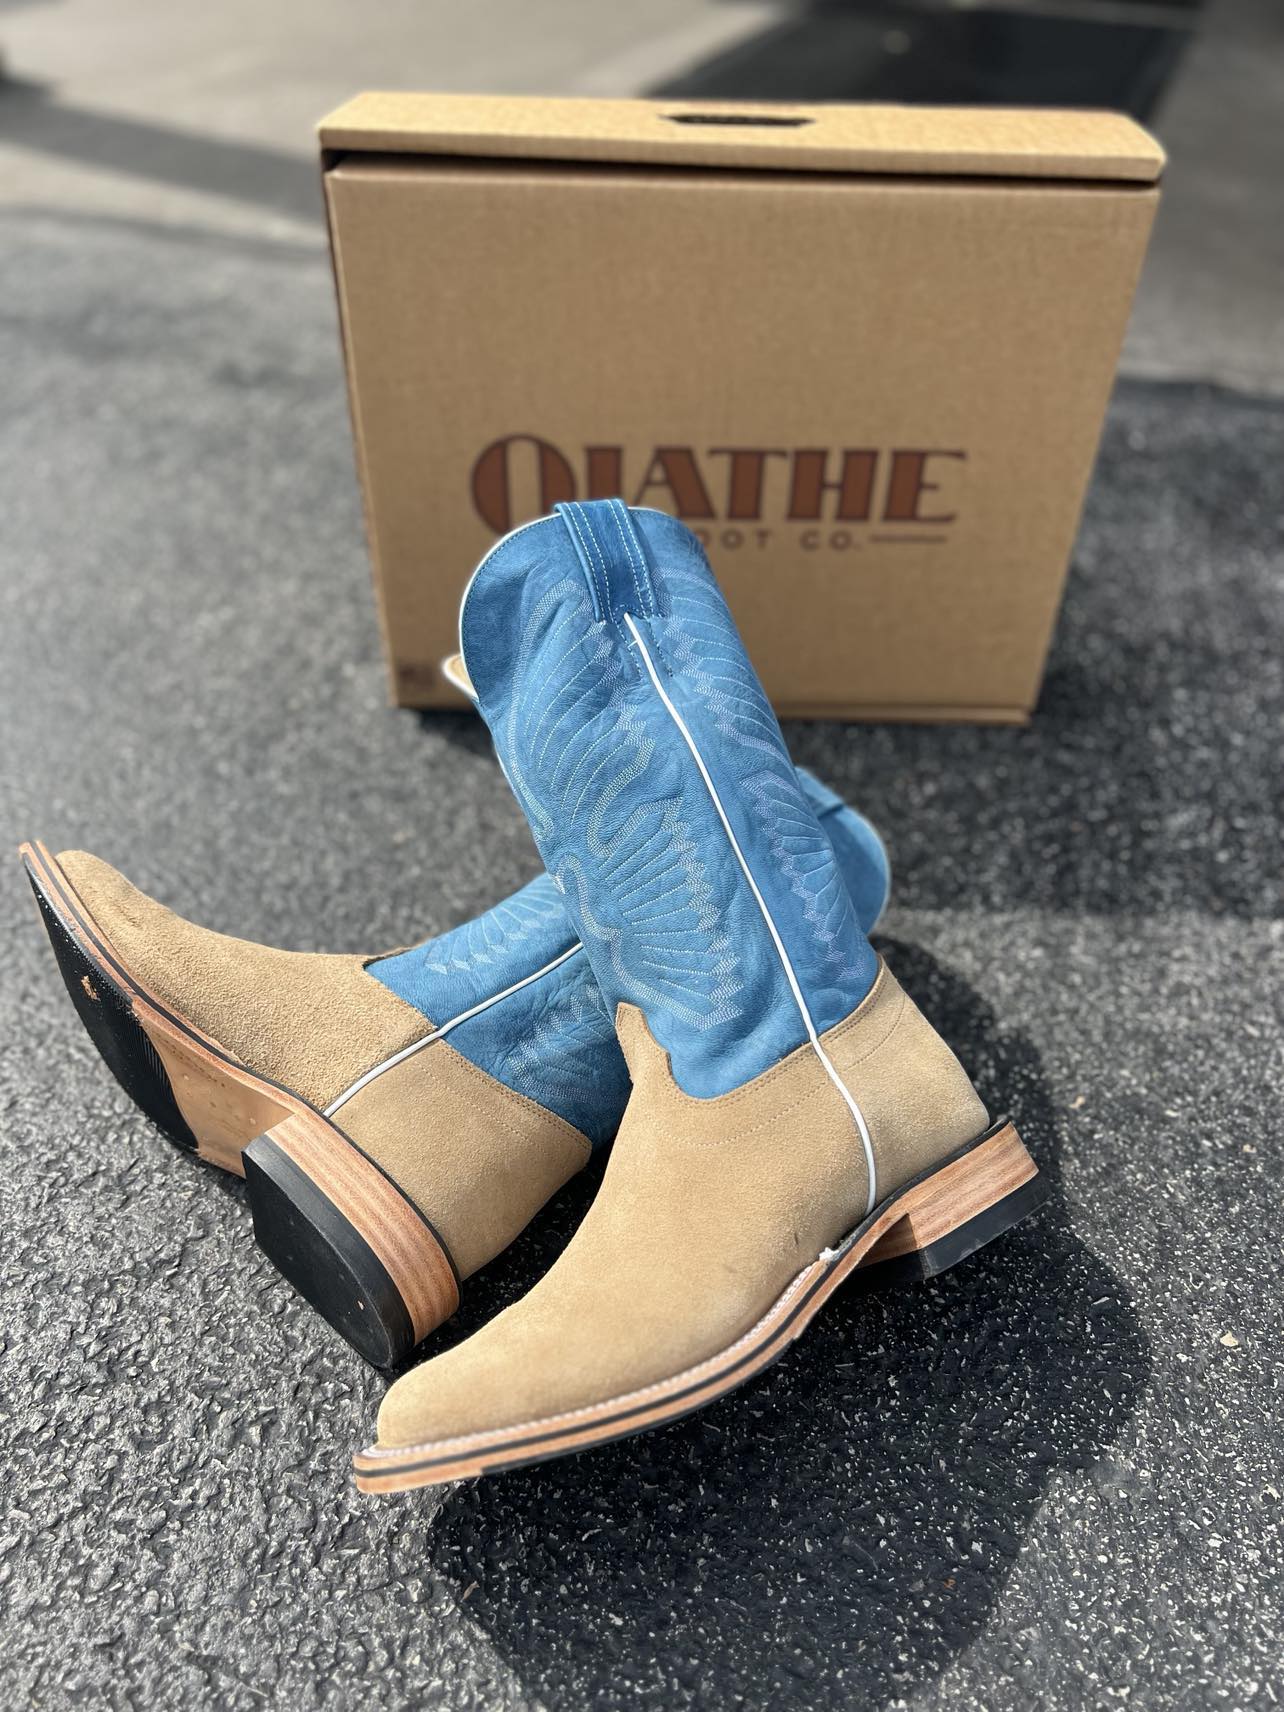 Men's Olathe Mesquite Beeswax Square Toe Boots-Men's Boots-Anderson Bean-Lucky J Boots & More, Women's, Men's, & Kids Western Store Located in Carthage, MO